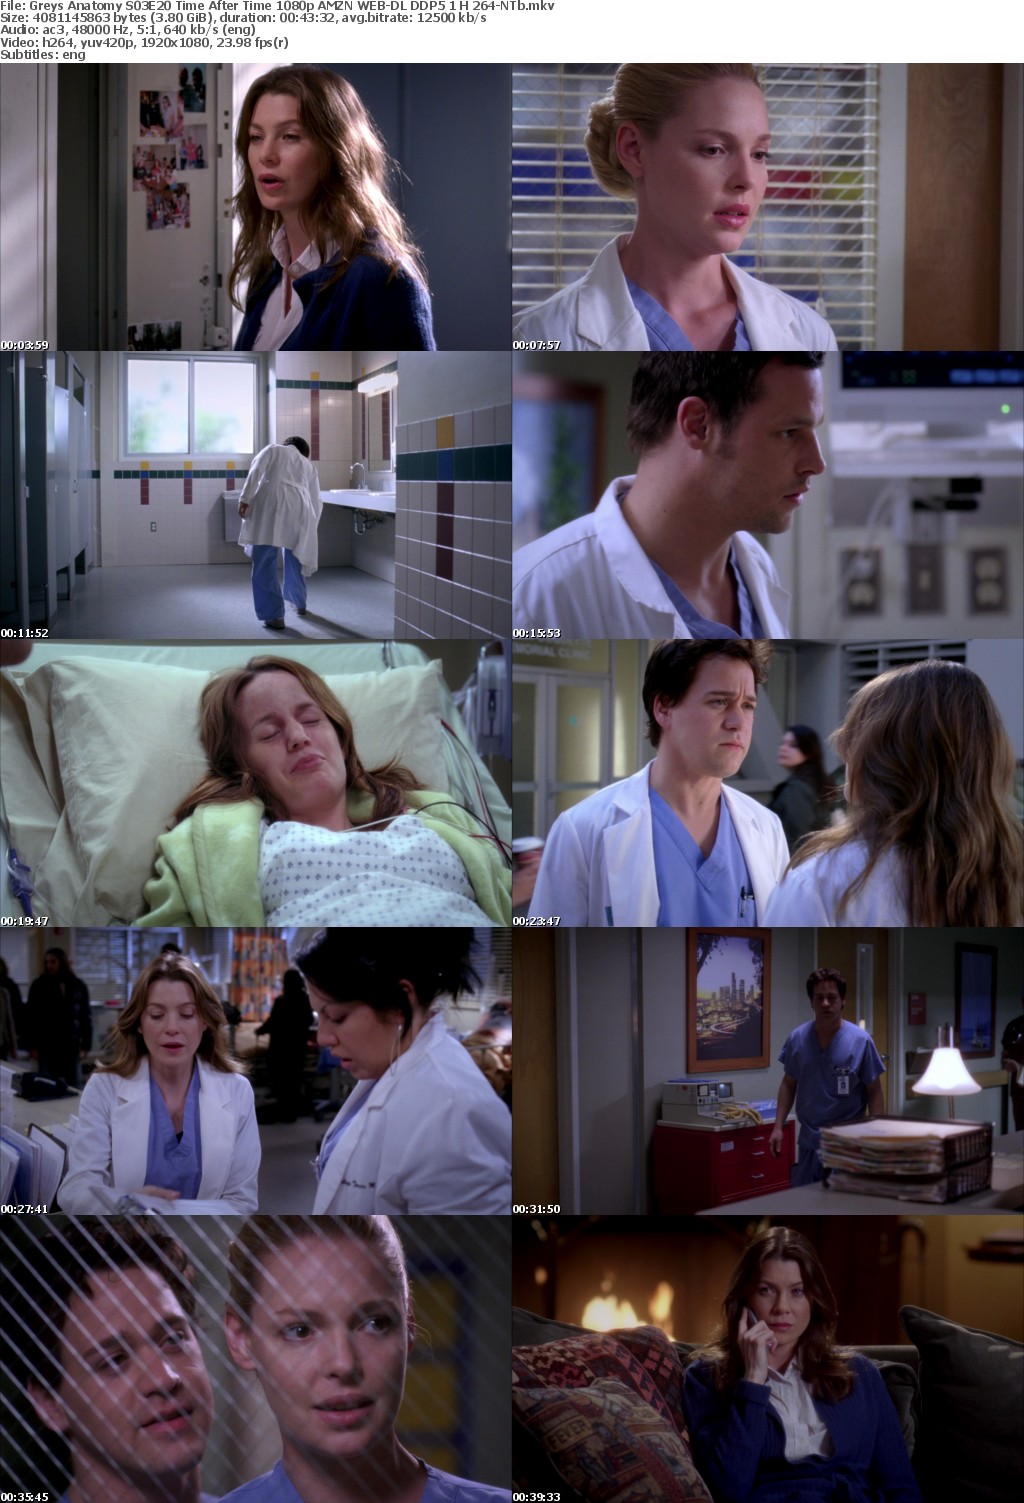 Greys Anatomy S03E20 Time After Time 1080p AMZN WEB-DL DDP5 1 H 264-NTb